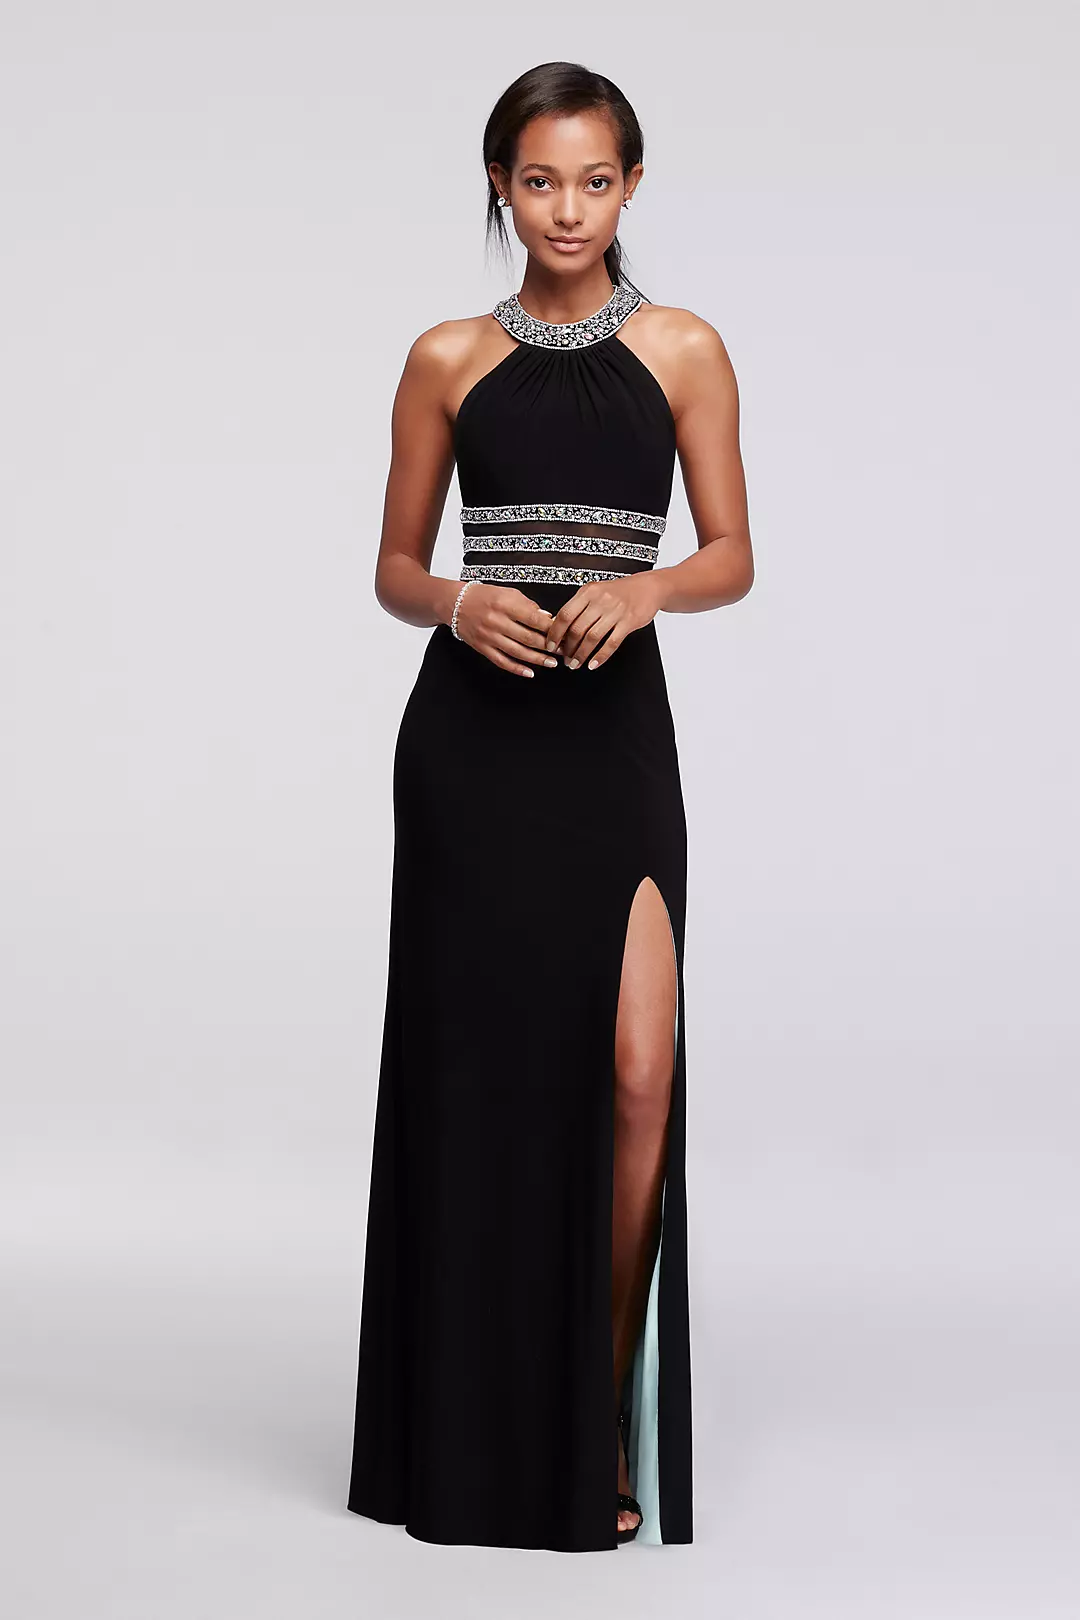 Beaded High Neck Prom Dress with Illusion Cutouts Image